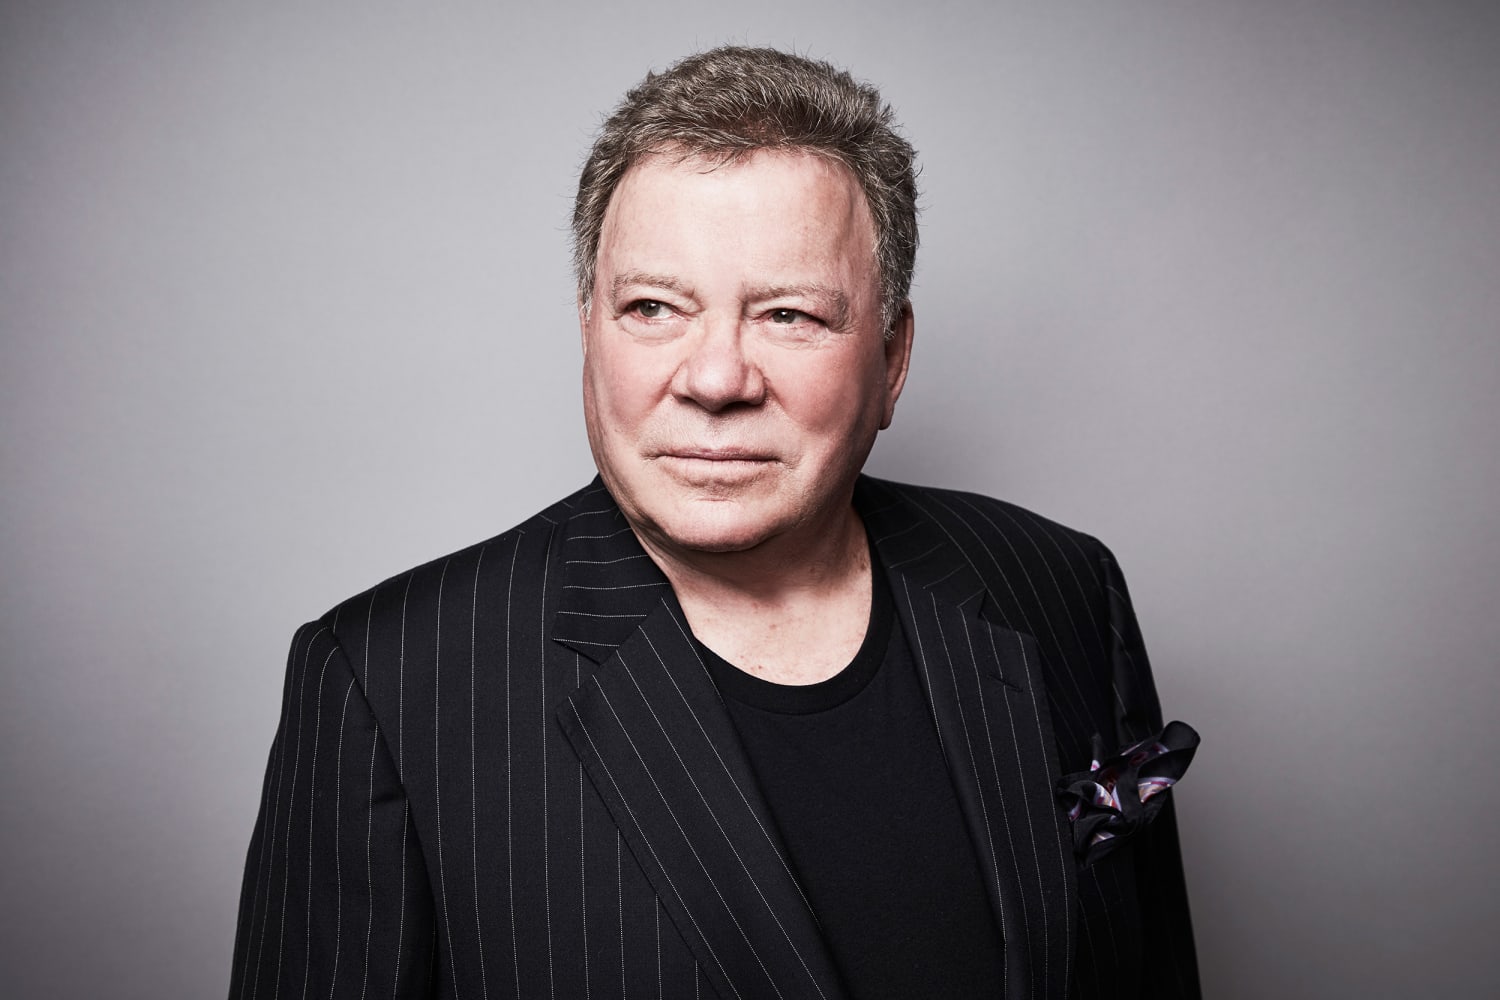 William Shatner on his RT show, the billionaire space race and mortality